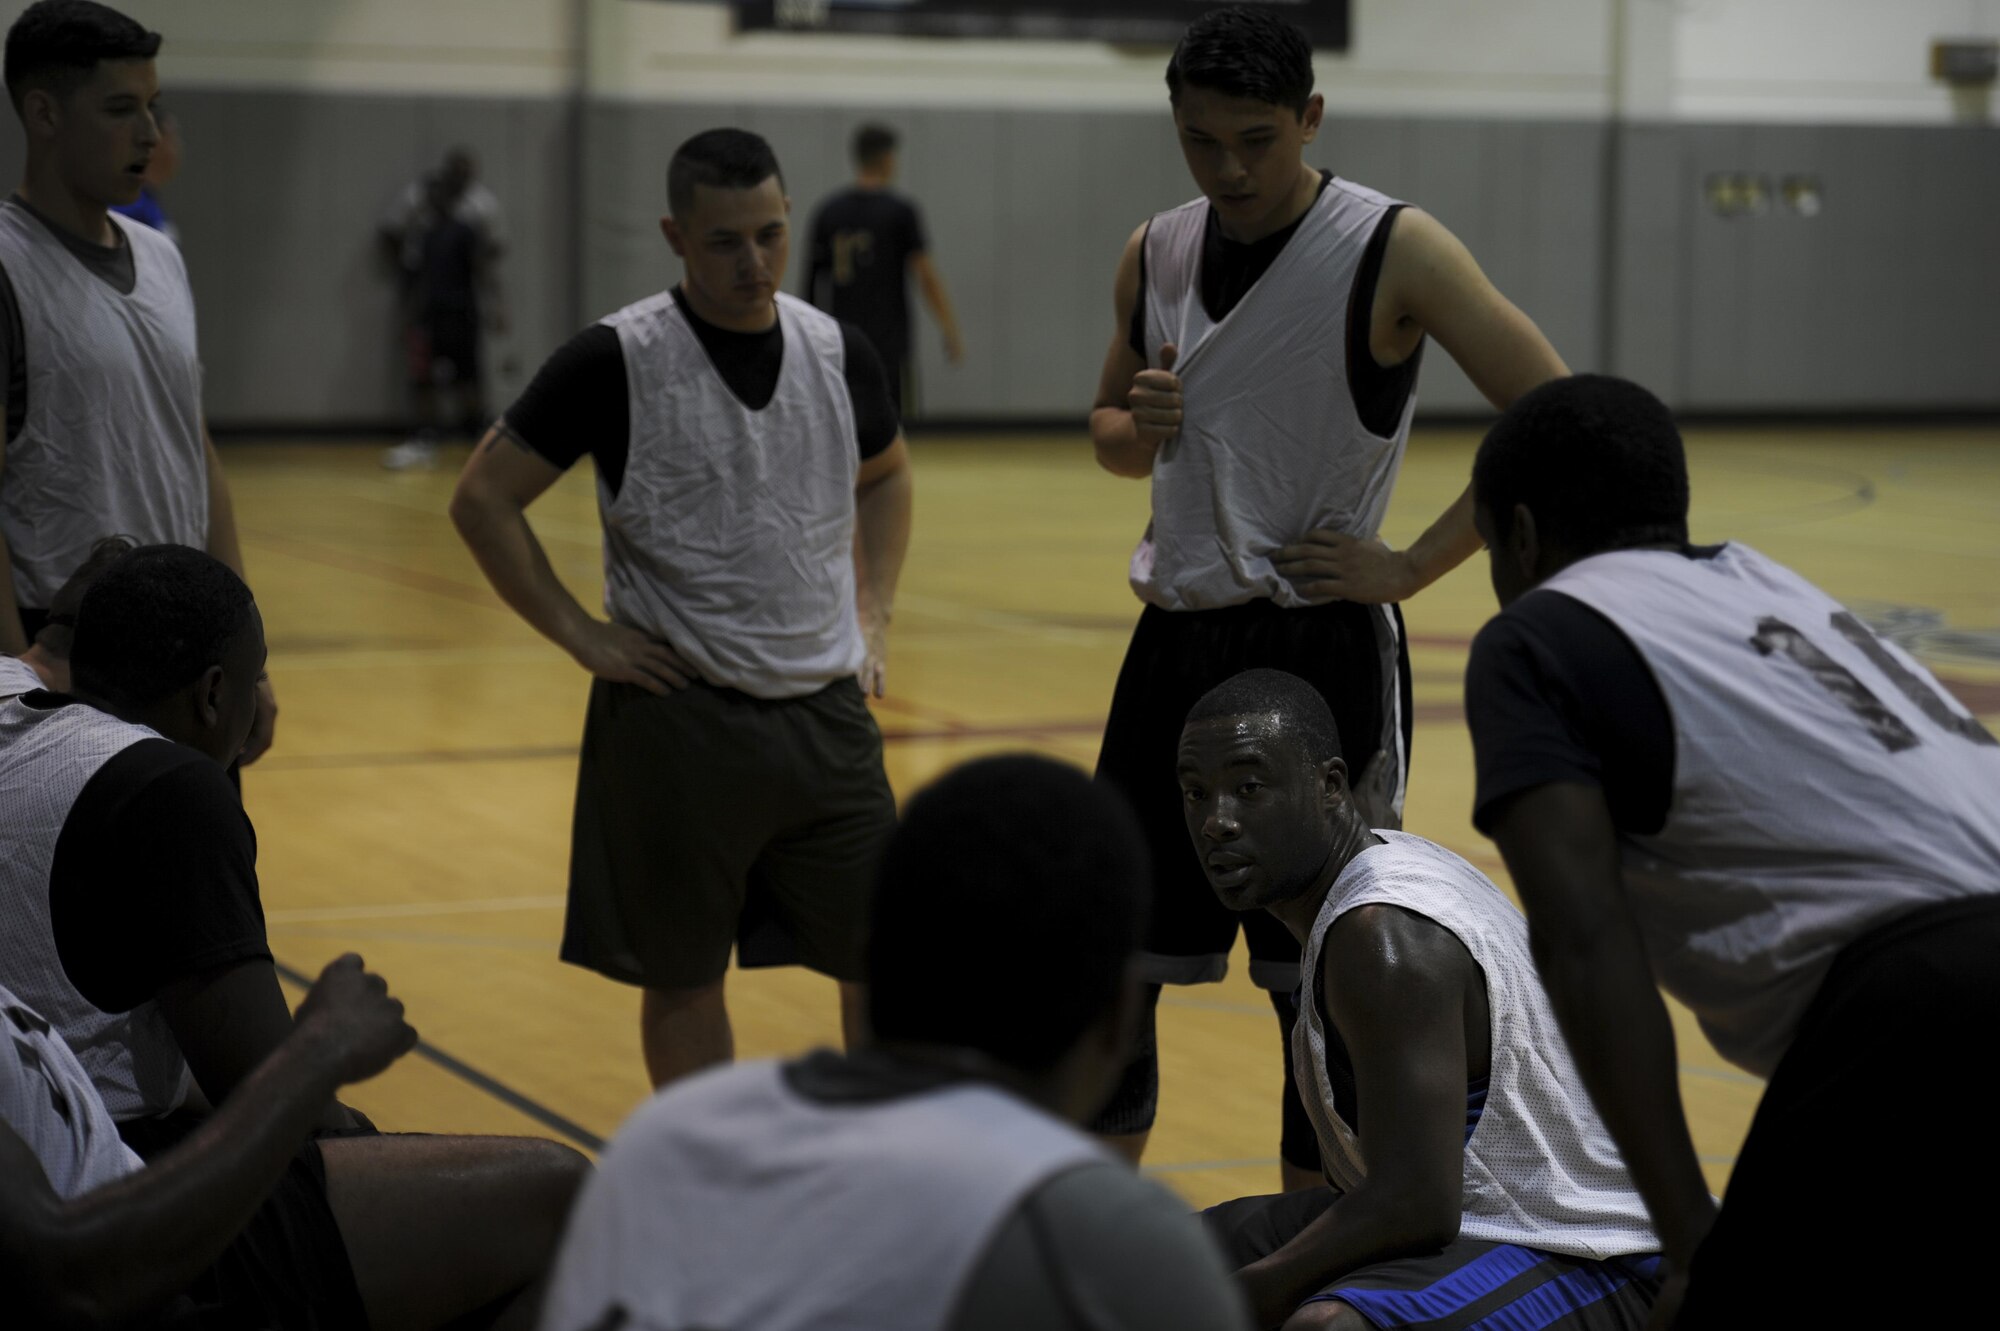 The 1st Special Operations Maintenance Squadron intramural basketball team huddle to discuss a gameplay strategy at Hurlburt Field, Fla., March 2, 2017. The 1st SOMXS competed in a mid-season game against the 1st Special Operations Contracting Squadron, with a record of five wins and five losses. (U.S. Air Force photo by Airman 1st Class Dennis Spain)